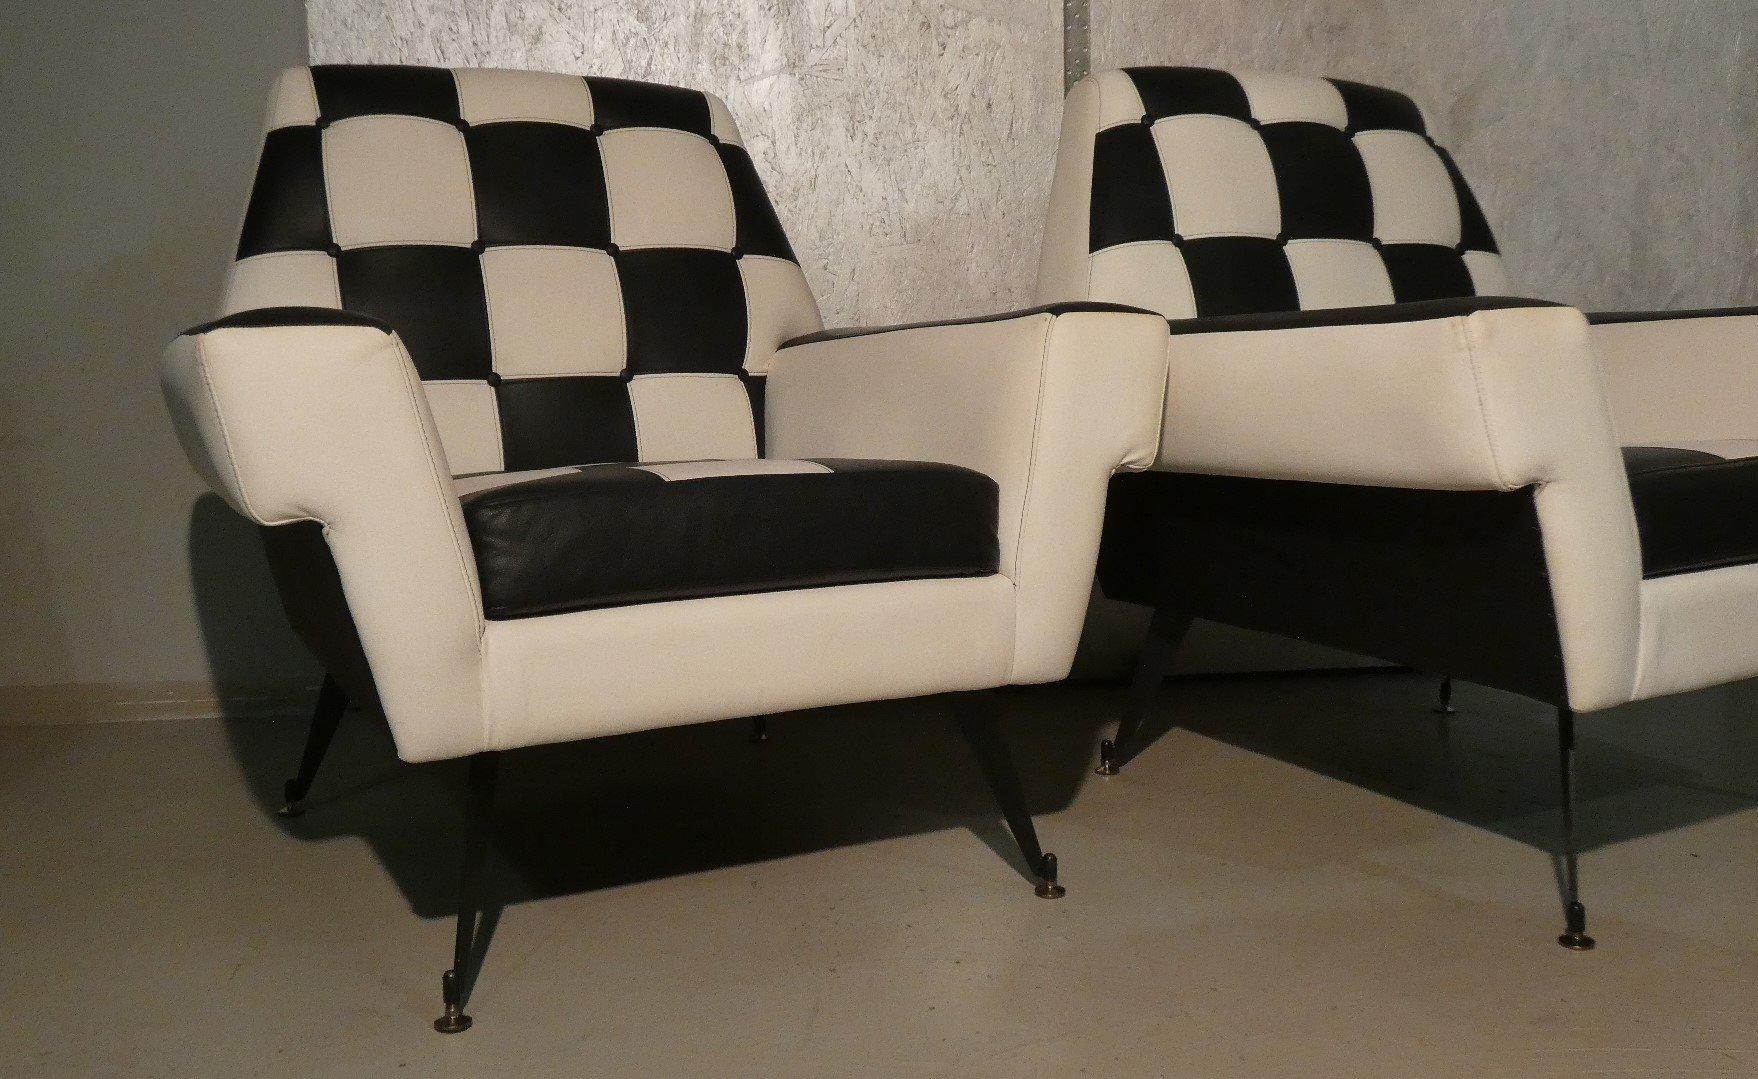 Pair of 1960s armchairs with foam padding and two-tone vinyl leather upholstery.

The width of the seat makes them extremely comfortable, and even the backrest, while slightly stiff has an ergonomics that gives pleasant comfort.

The accuracy in